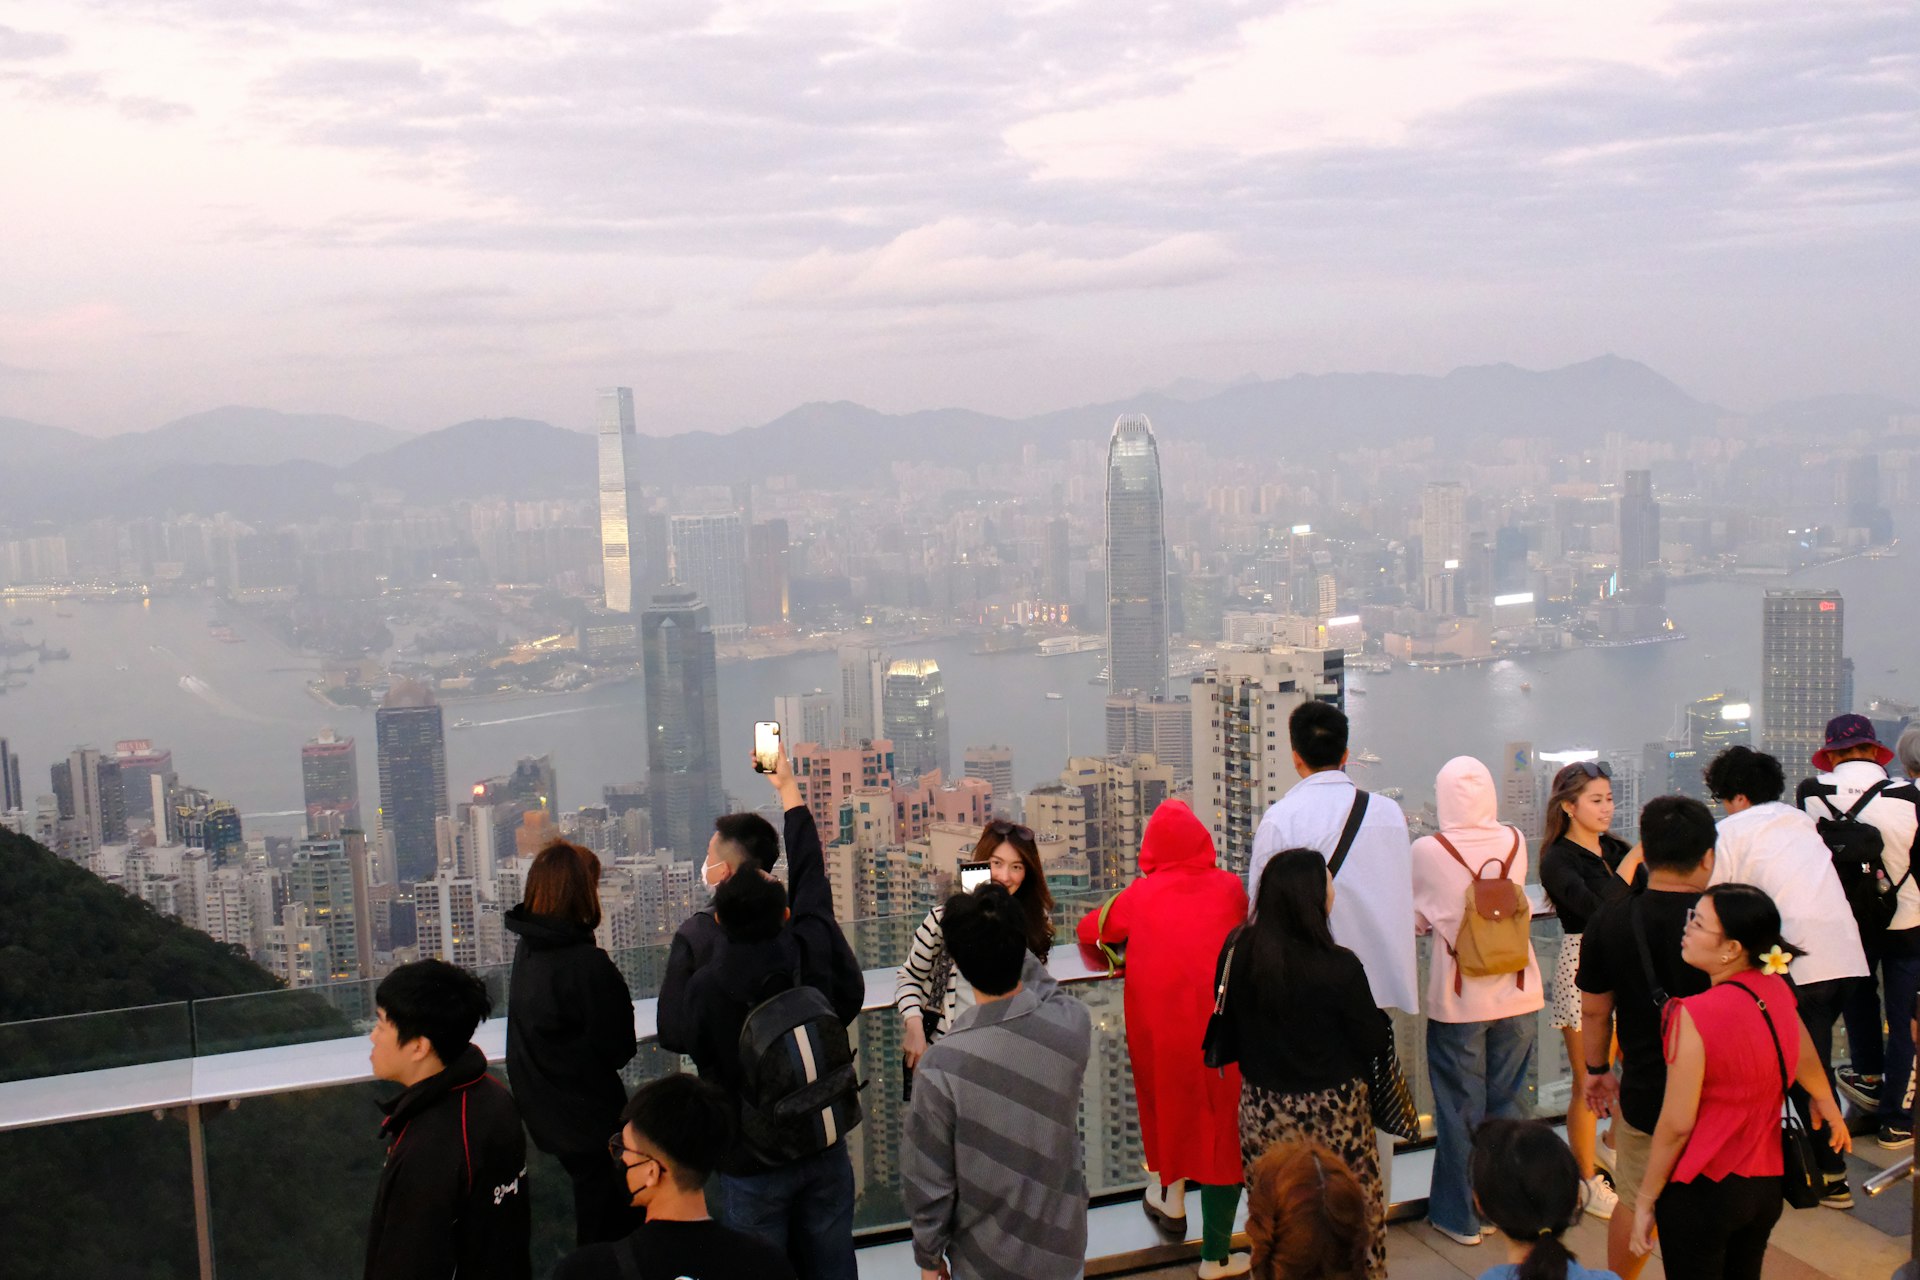 A crowd looking out over a cityscape with an overcast sky